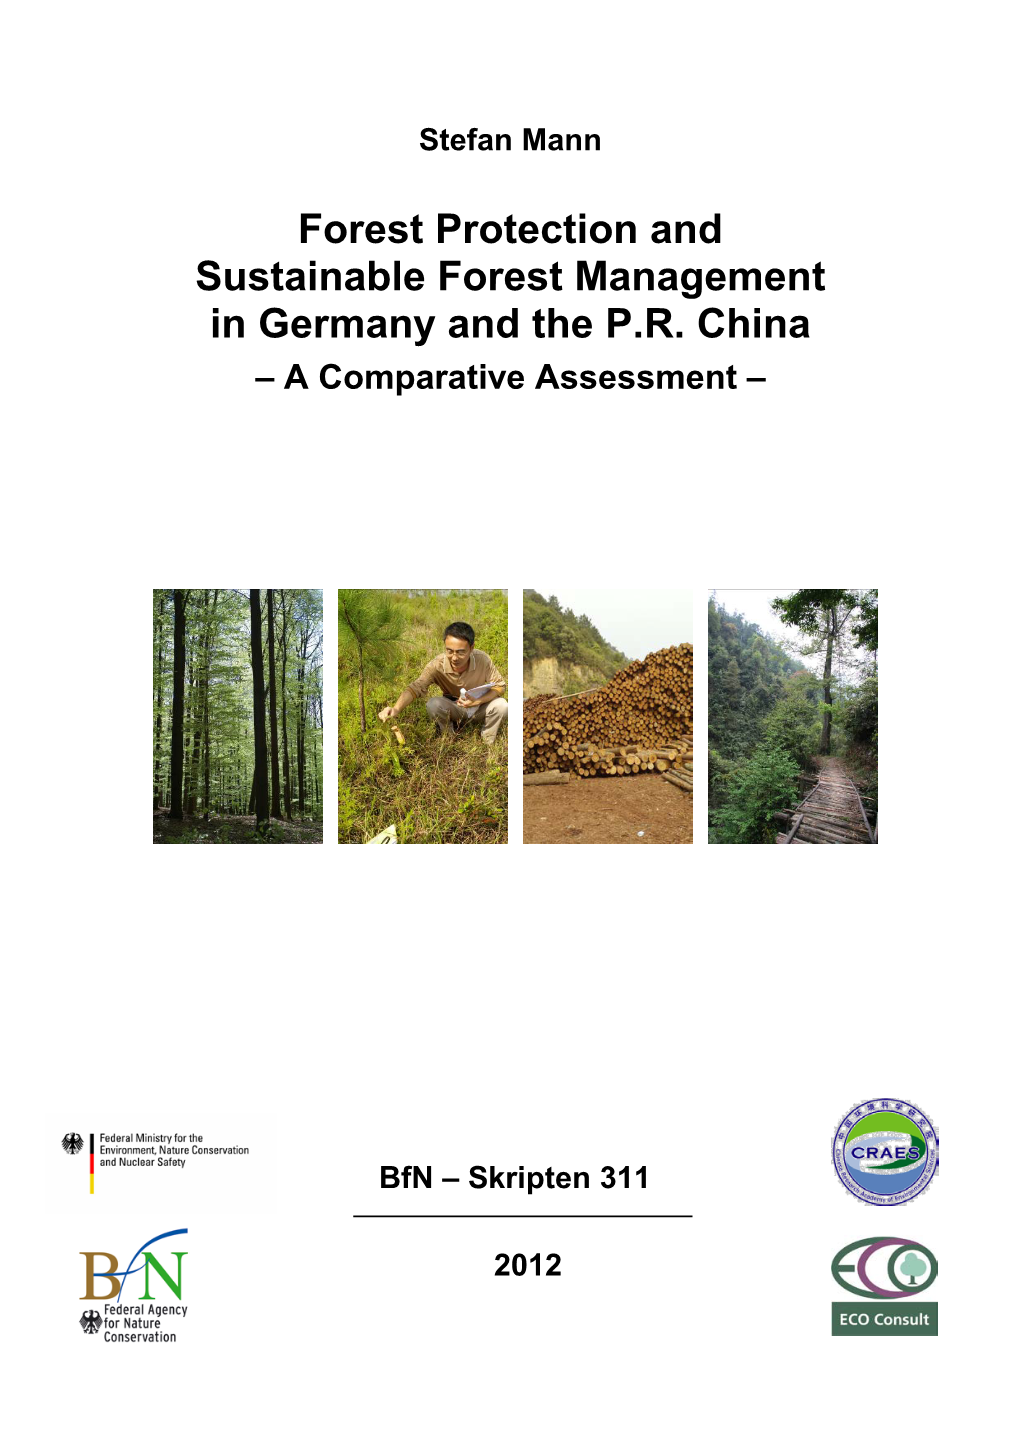 Forest Protection and Sustainable Forest Management in Germany and the P.R